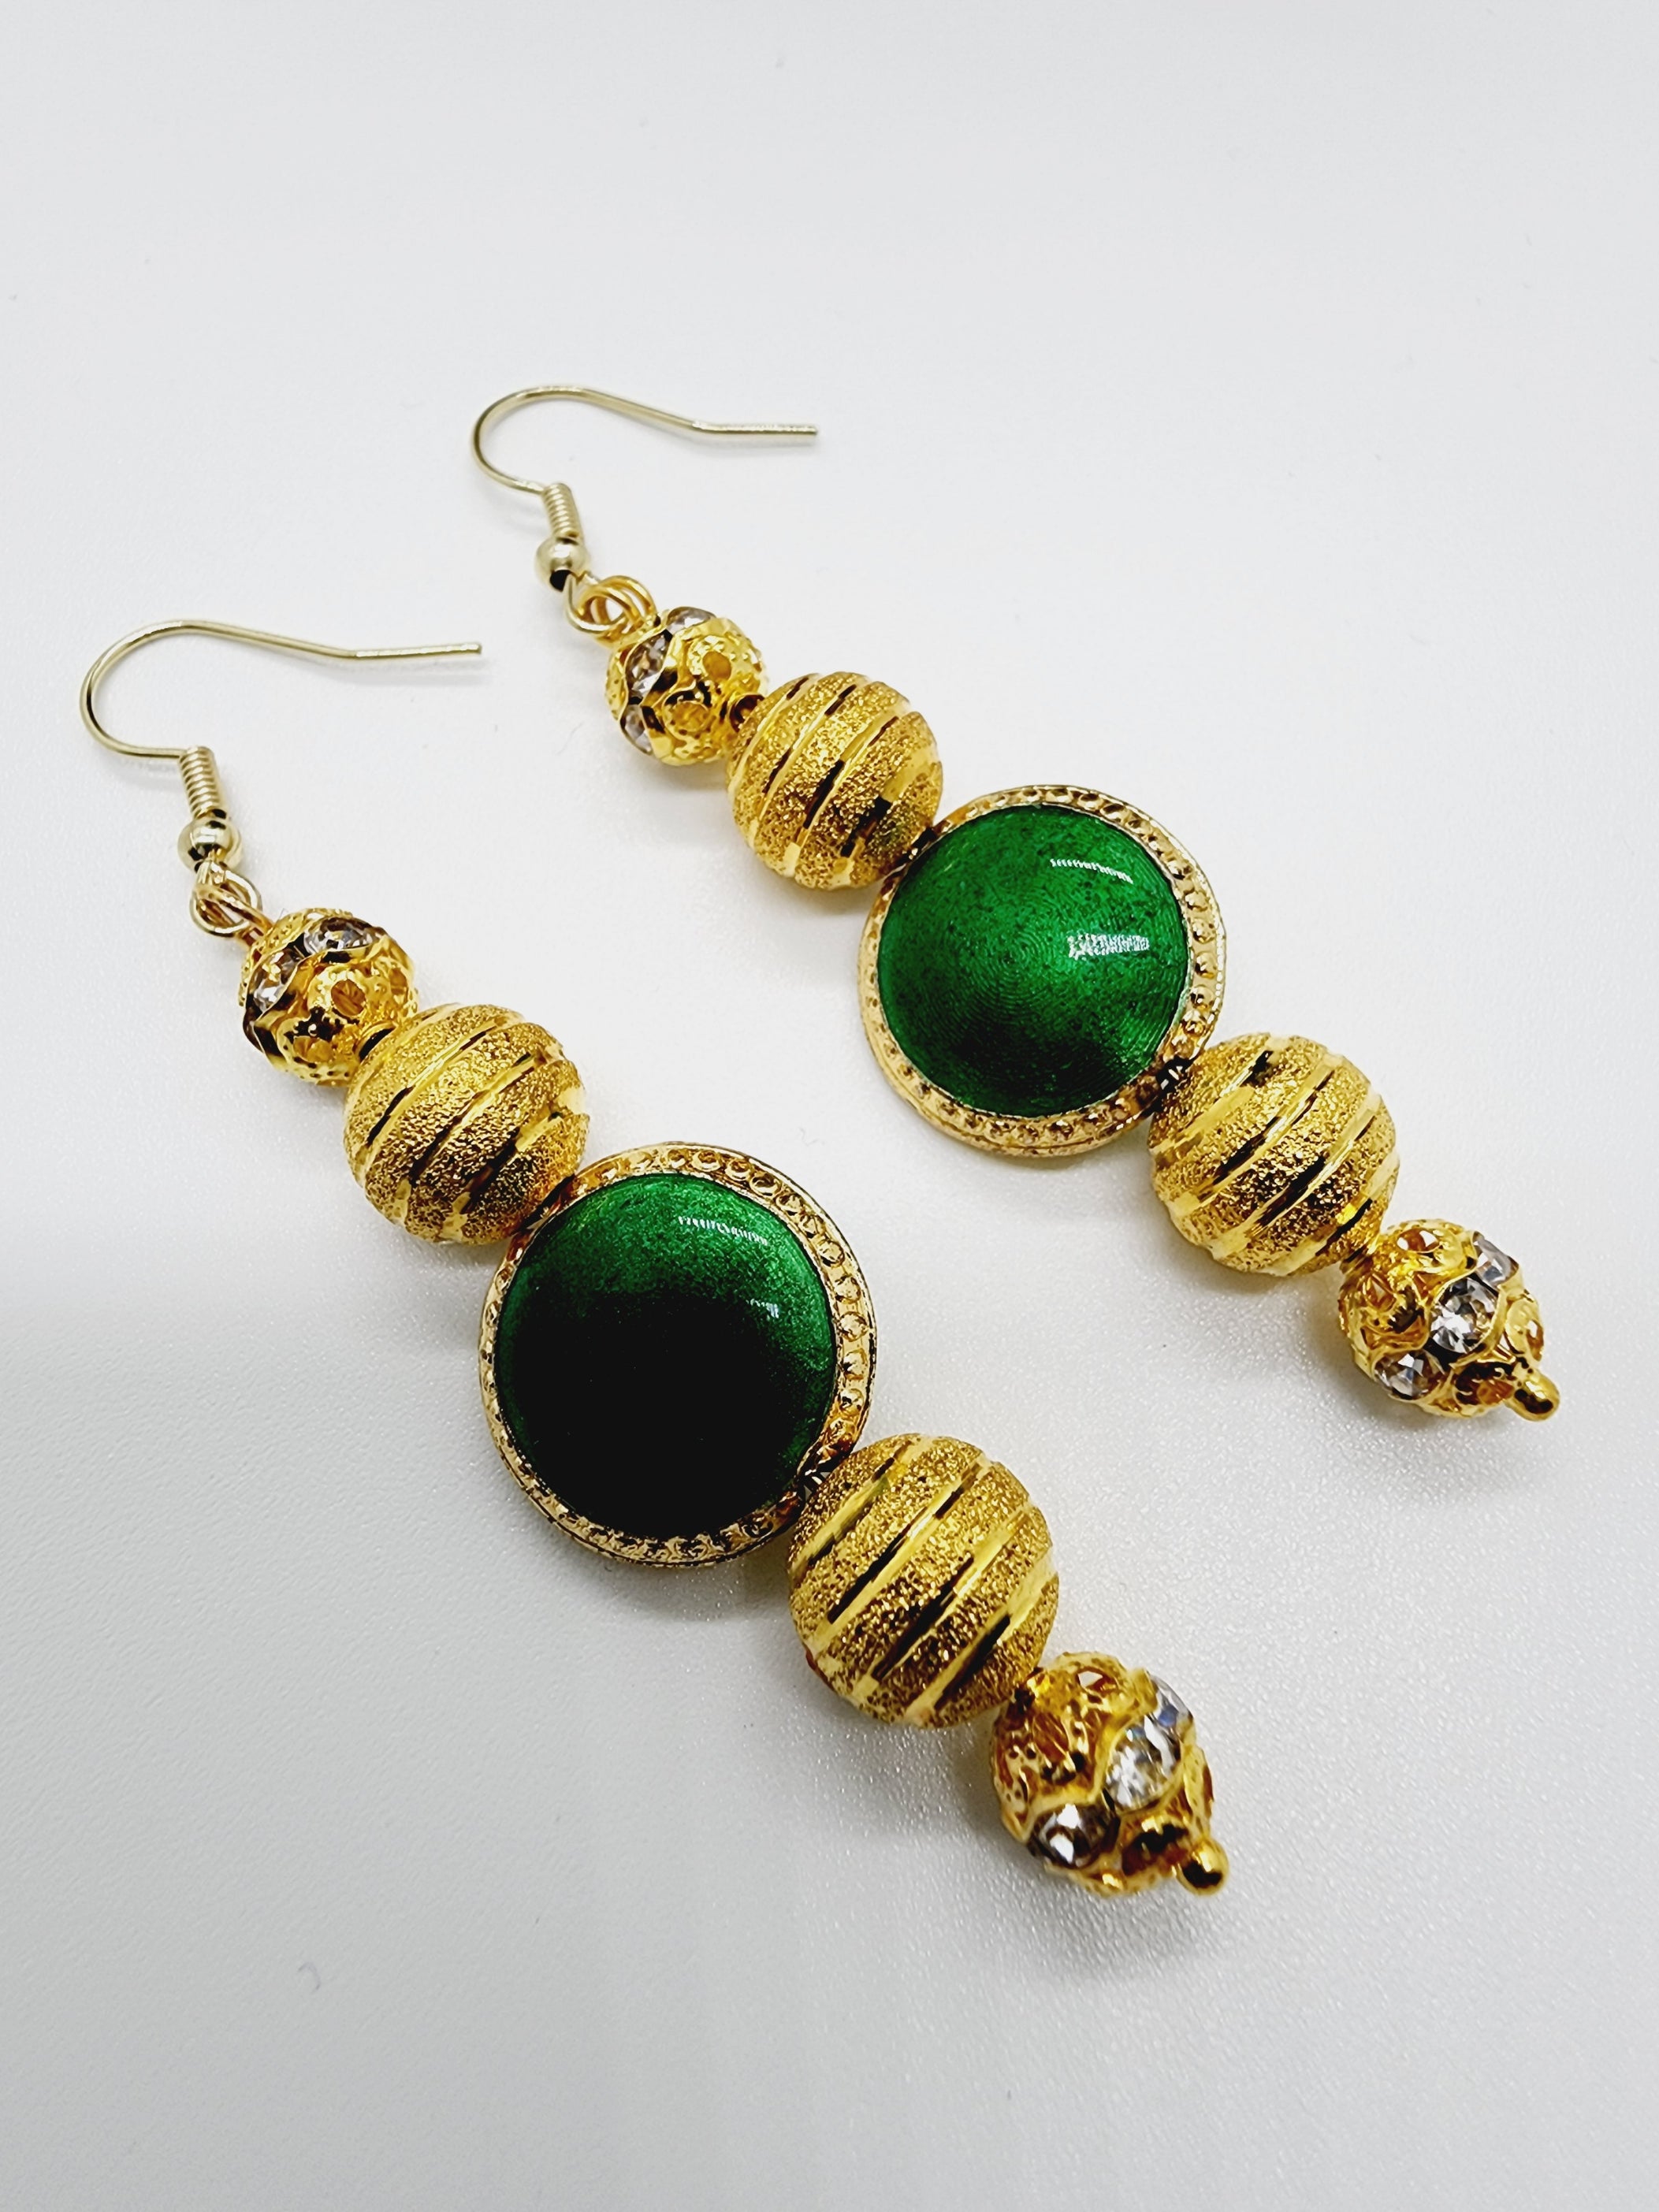 Length: 2.75 inches | Weight: 0.3 ounces  Distinctly You! These handmade earrings are made using gold inlaid rhinestone beads, striped gold bead plated and green glass bead, and hypoallergenic hooks with back closures.  